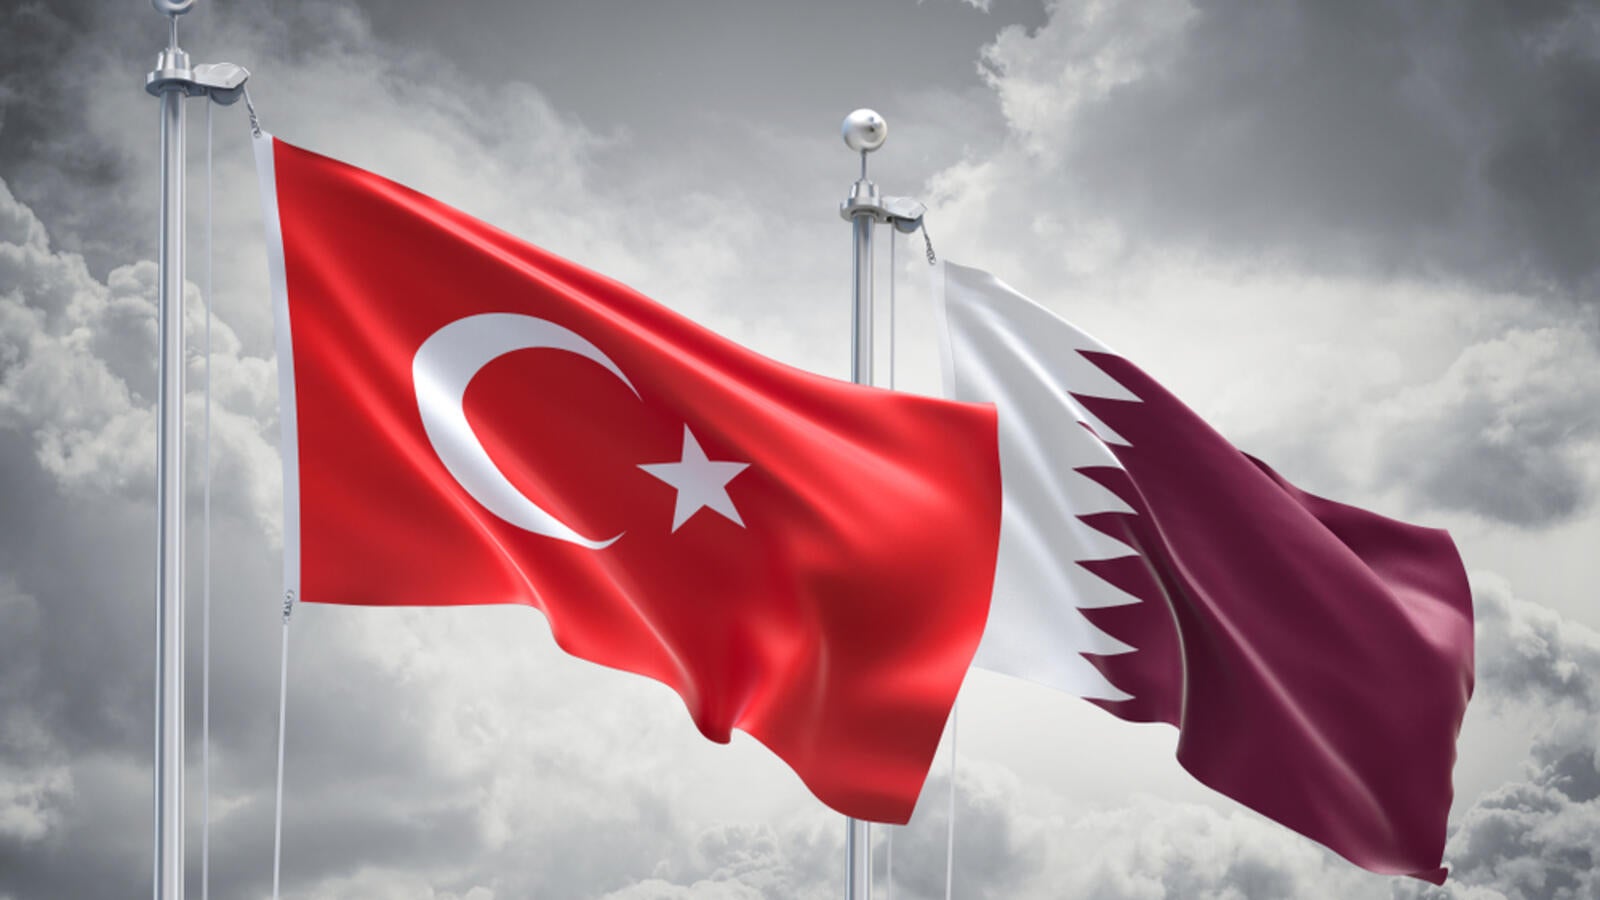 Turkey: Good old Qatar comes to the rescue